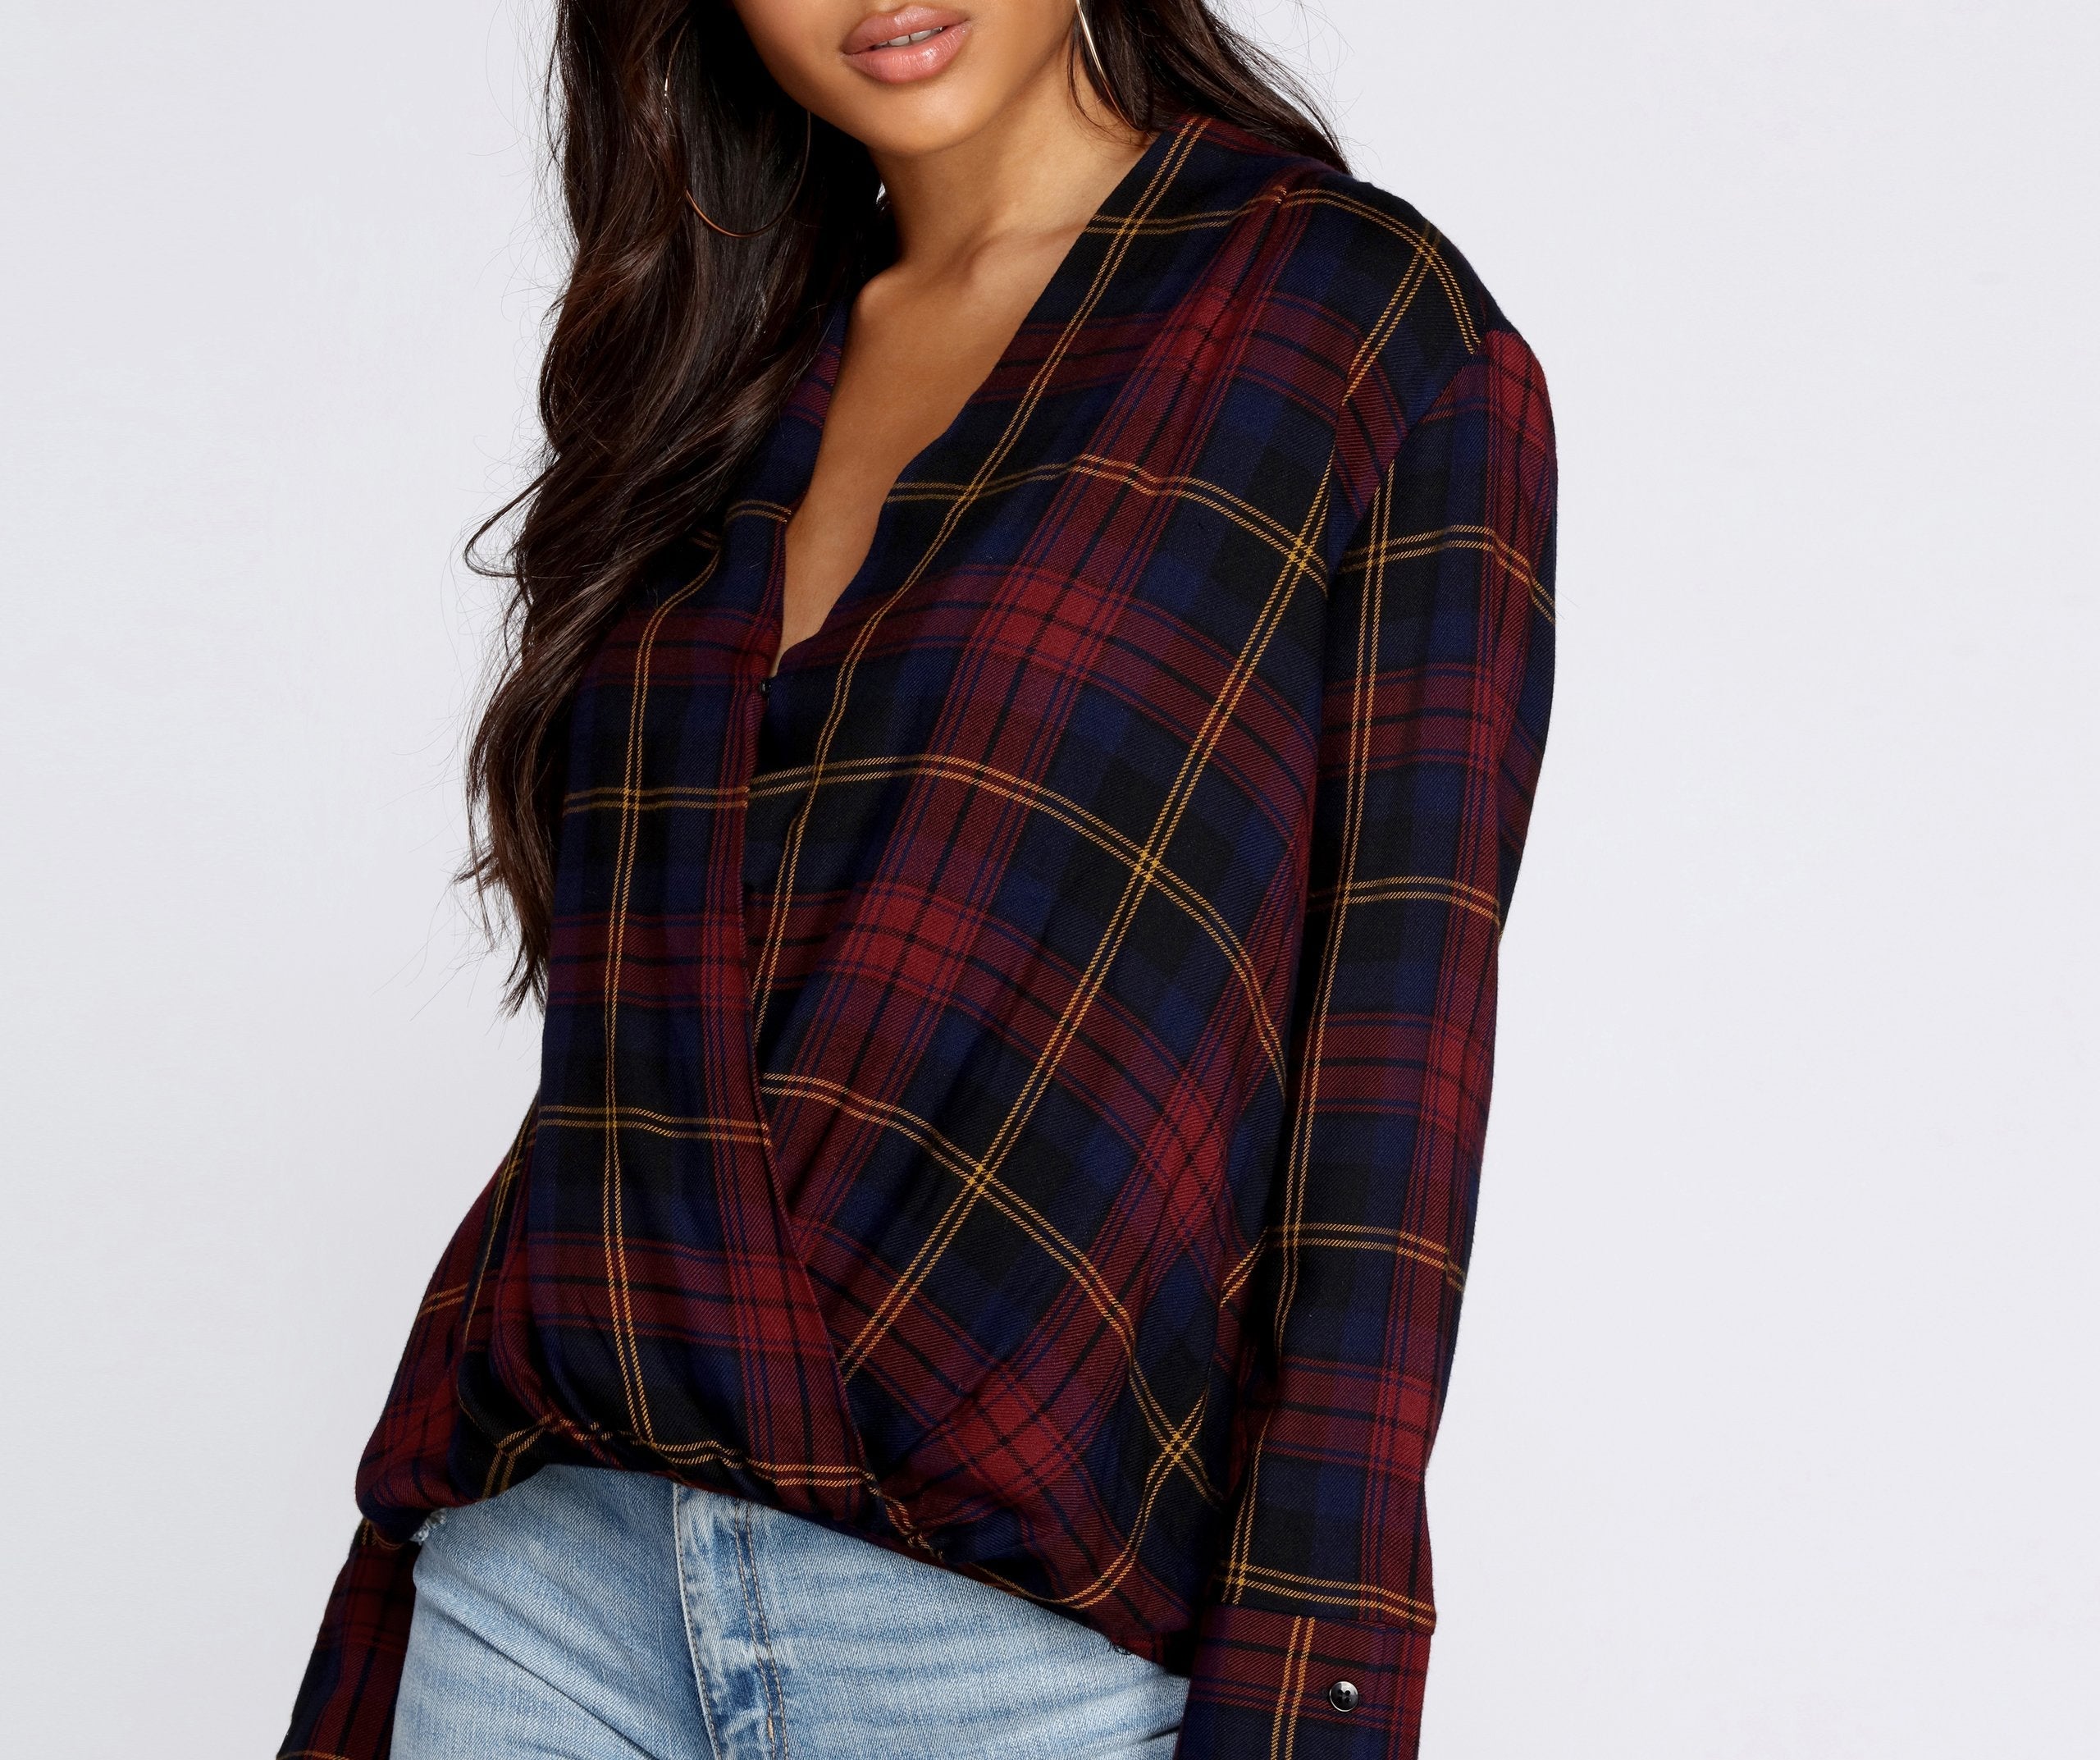 She's Outdoorsy Plaid Top